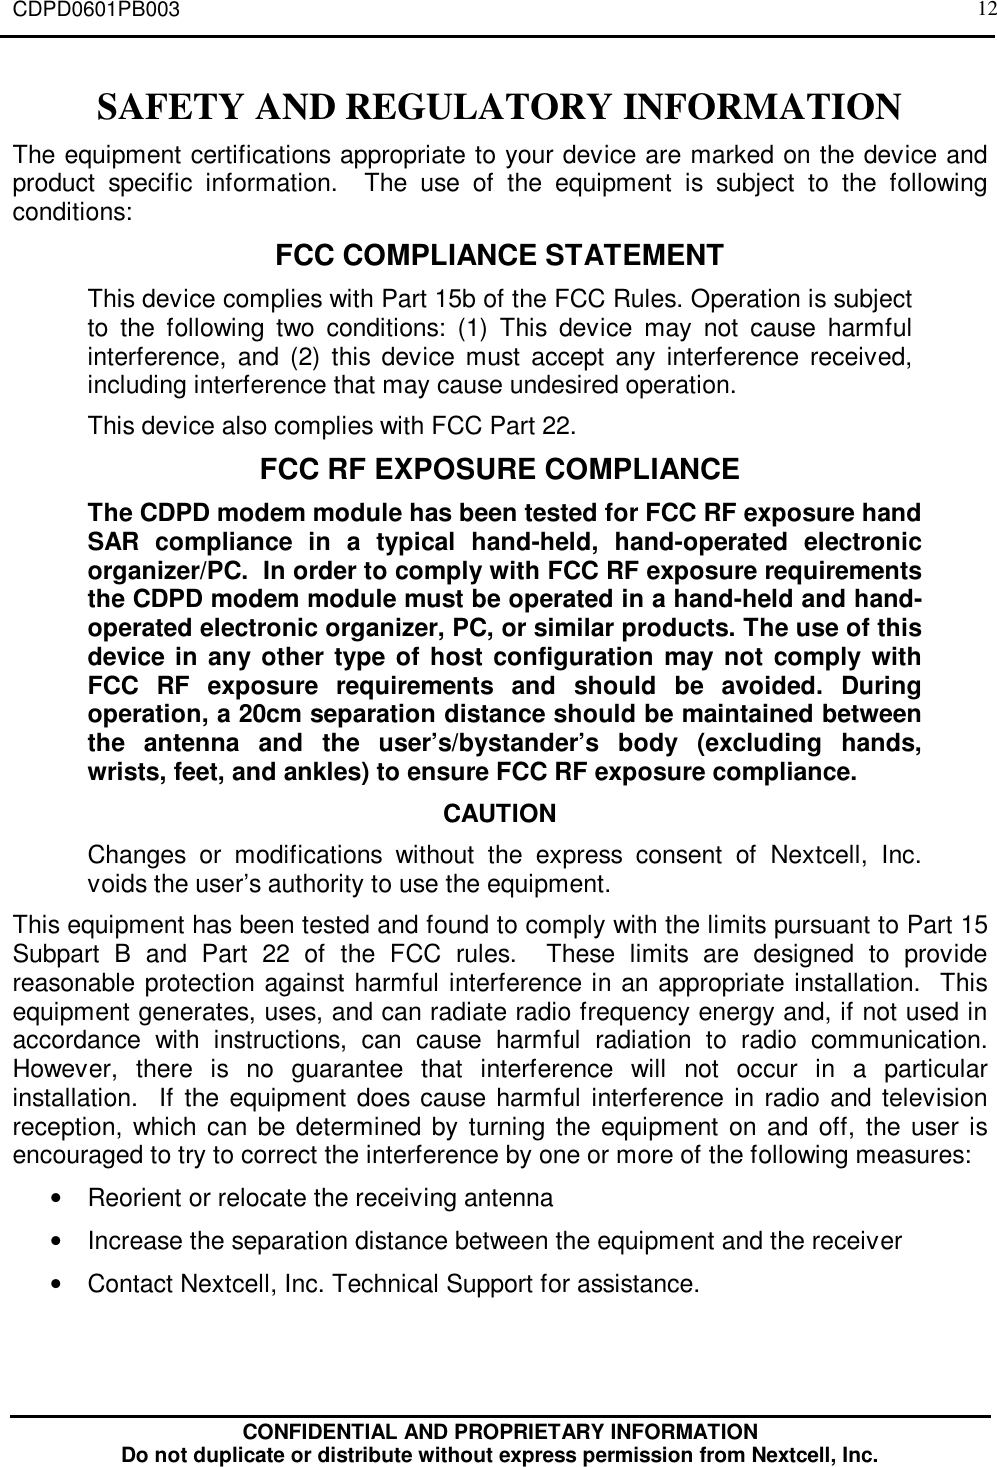 CDPD0601PB003CONFIDENTIAL AND PROPRIETARY INFORMATIONDo not duplicate or distribute without express permission from Nextcell, Inc.12SAFETY AND REGULATORY INFORMATIONThe equipment certifications appropriate to your device are marked on the device andproduct specific information.  The use of the equipment is subject to the followingconditions:FCC COMPLIANCE STATEMENTThis device complies with Part 15b of the FCC Rules. Operation is subjectto the following two conditions: (1) This device may not cause harmfulinterference, and (2) this device must accept any interference received,including interference that may cause undesired operation.This device also complies with FCC Part 22.FCC RF EXPOSURE COMPLIANCEThe CDPD modem module has been tested for FCC RF exposure handSAR compliance in a typical hand-held, hand-operated electronicorganizer/PC.  In order to comply with FCC RF exposure requirementsthe CDPD modem module must be operated in a hand-held and hand-operated electronic organizer, PC, or similar products. The use of thisdevice in any other type of host configuration may not comply withFCC RF exposure requirements and should be avoided. Duringoperation, a 20cm separation distance should be maintained betweenthe antenna and the user’s/bystander’s body (excluding hands,wrists, feet, and ankles) to ensure FCC RF exposure compliance.CAUTIONChanges or modifications without the express consent of Nextcell, Inc.voids the user’s authority to use the equipment.This equipment has been tested and found to comply with the limits pursuant to Part 15Subpart B and Part 22 of the FCC rules.  These limits are designed to providereasonable protection against harmful interference in an appropriate installation.  Thisequipment generates, uses, and can radiate radio frequency energy and, if not used inaccordance with instructions, can cause harmful radiation to radio communication.However, there is no guarantee that interference will not occur in a particularinstallation.  If the equipment does cause harmful interference in radio and televisionreception, which can be determined by turning the equipment on and off, the user isencouraged to try to correct the interference by one or more of the following measures:• Reorient or relocate the receiving antenna• Increase the separation distance between the equipment and the receiver• Contact Nextcell, Inc. Technical Support for assistance.